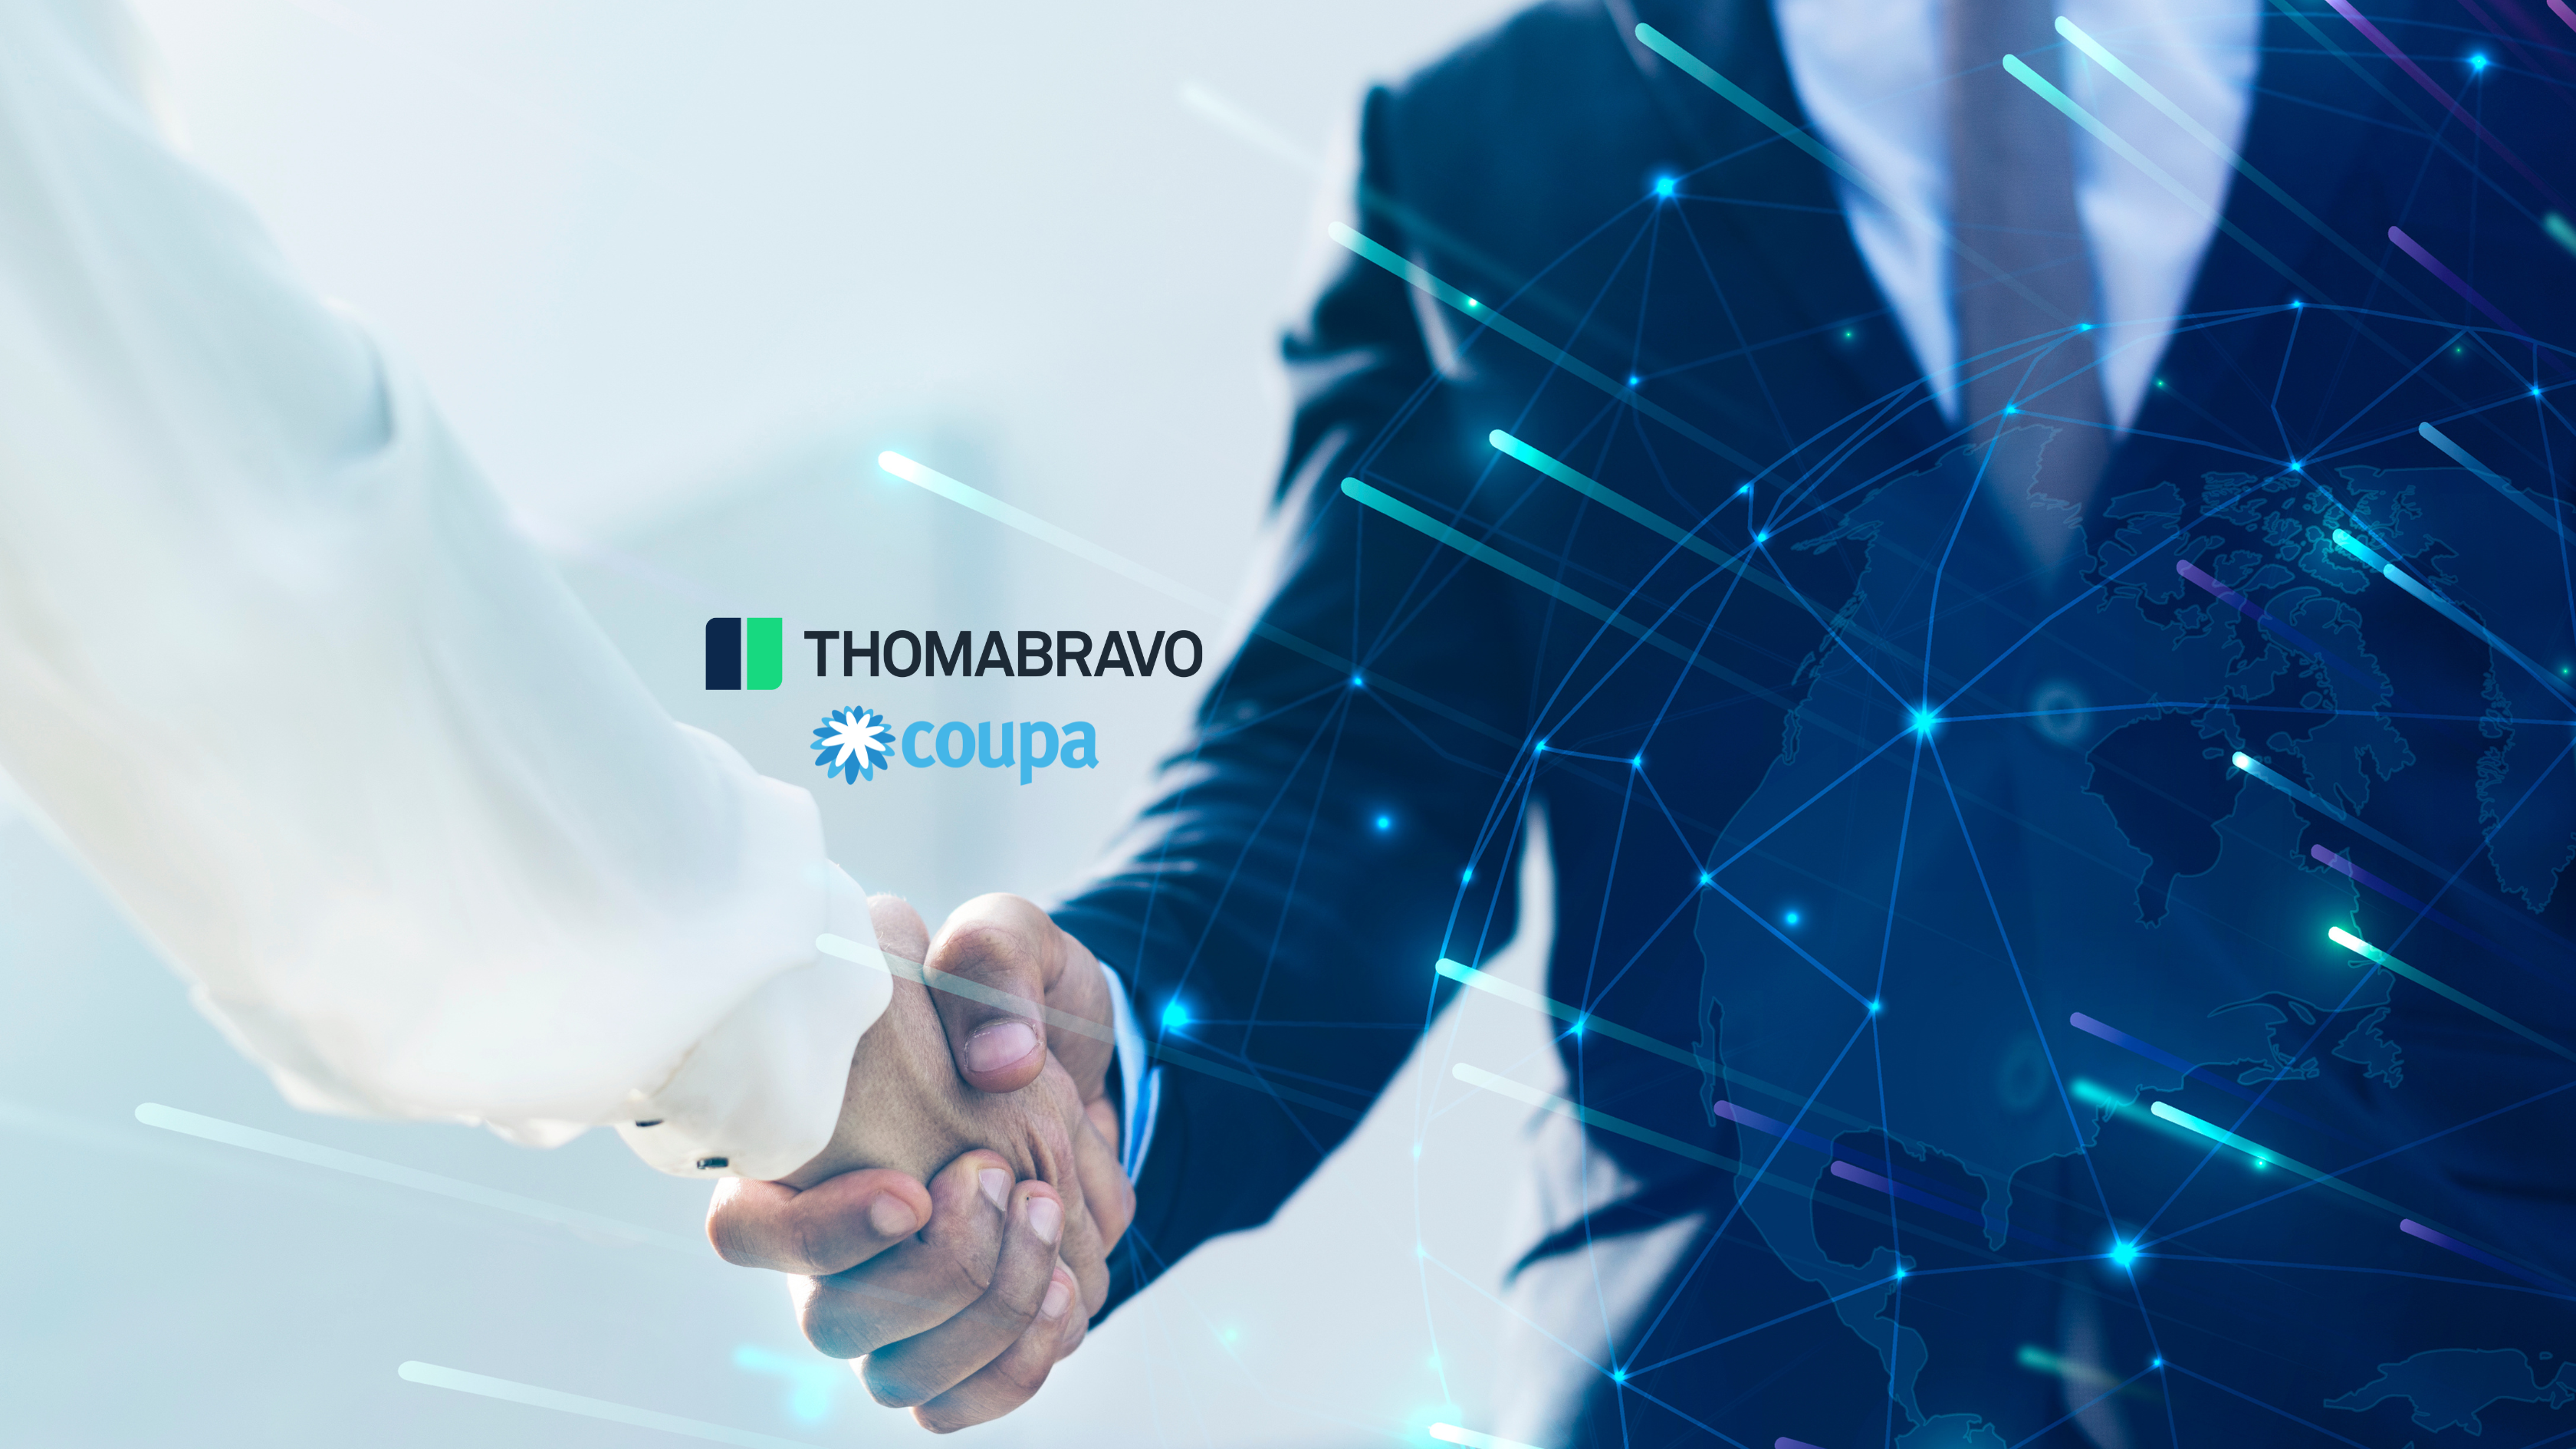 Thoma Bravo’s Acquisition of Coupa Highlights the Value of B2B SaaS and Embedded Payments